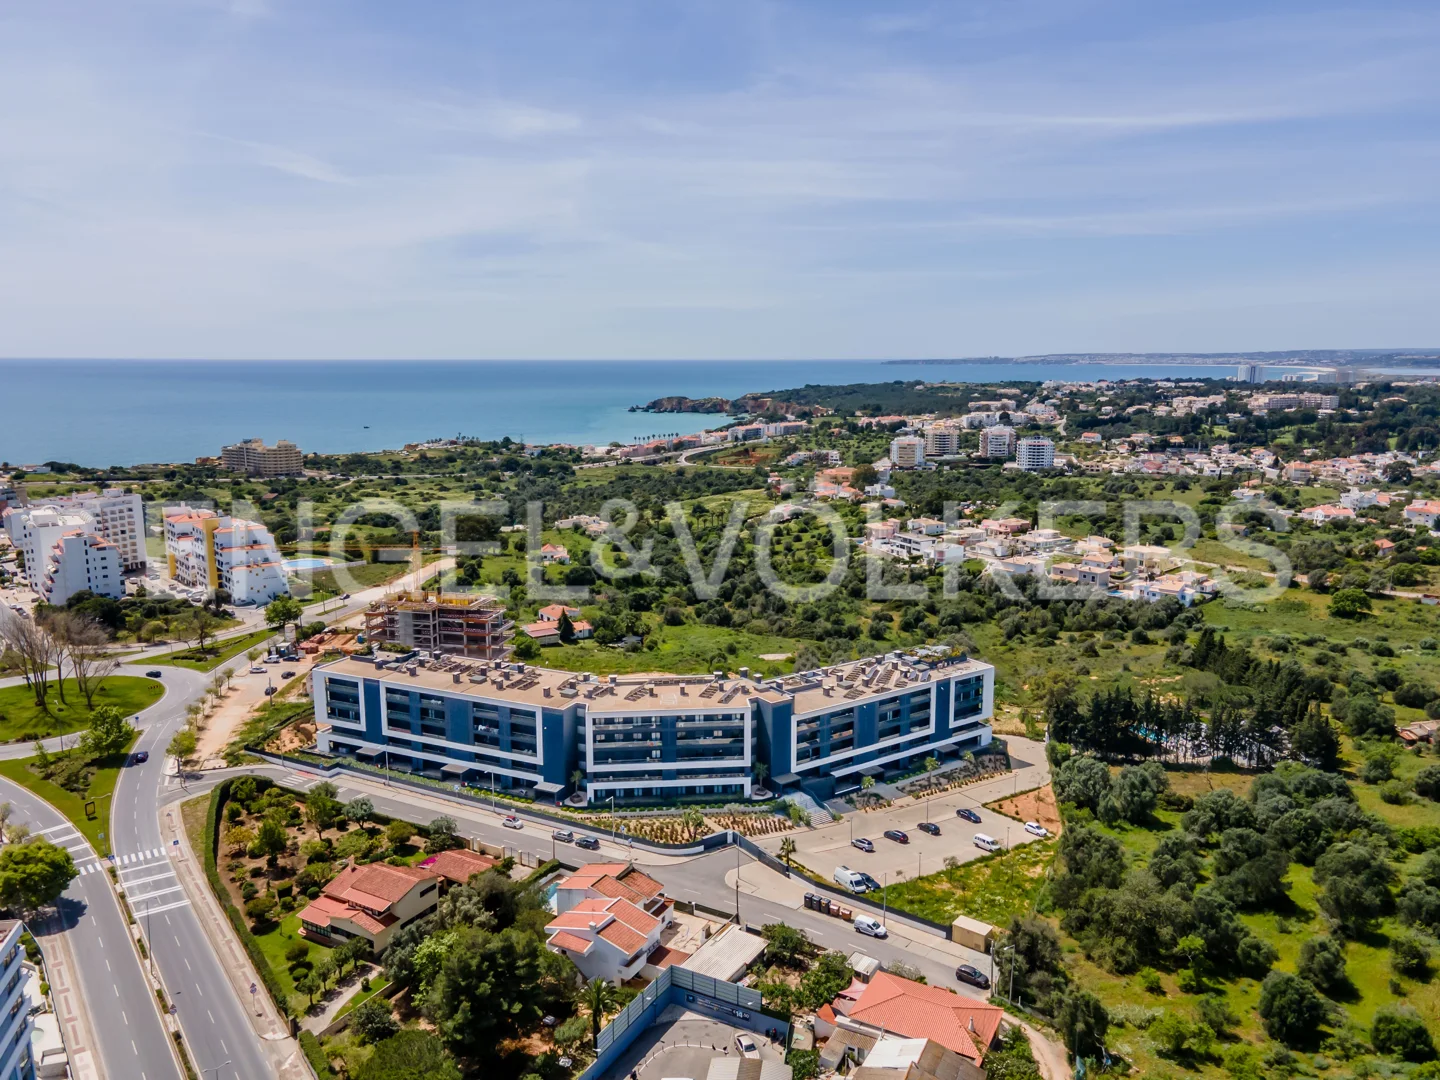 4 Bedroom Penthouse Apartment with sea view - Portimão